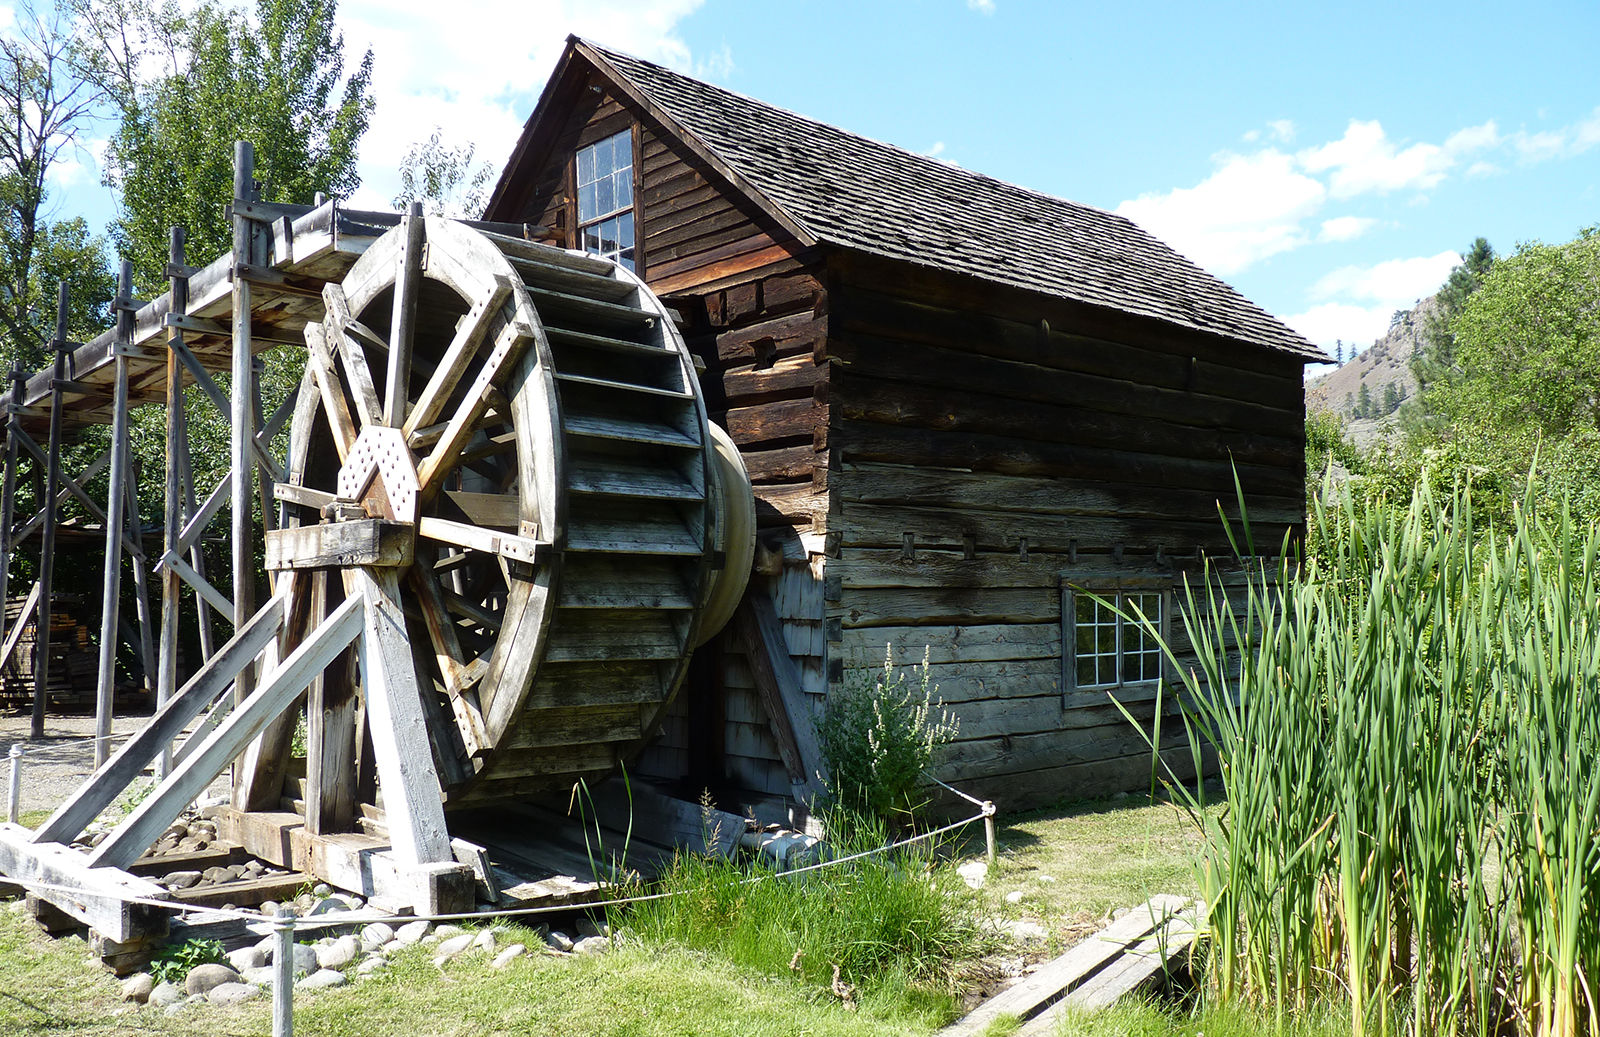 View of the Grist Mill located in Keremeos 